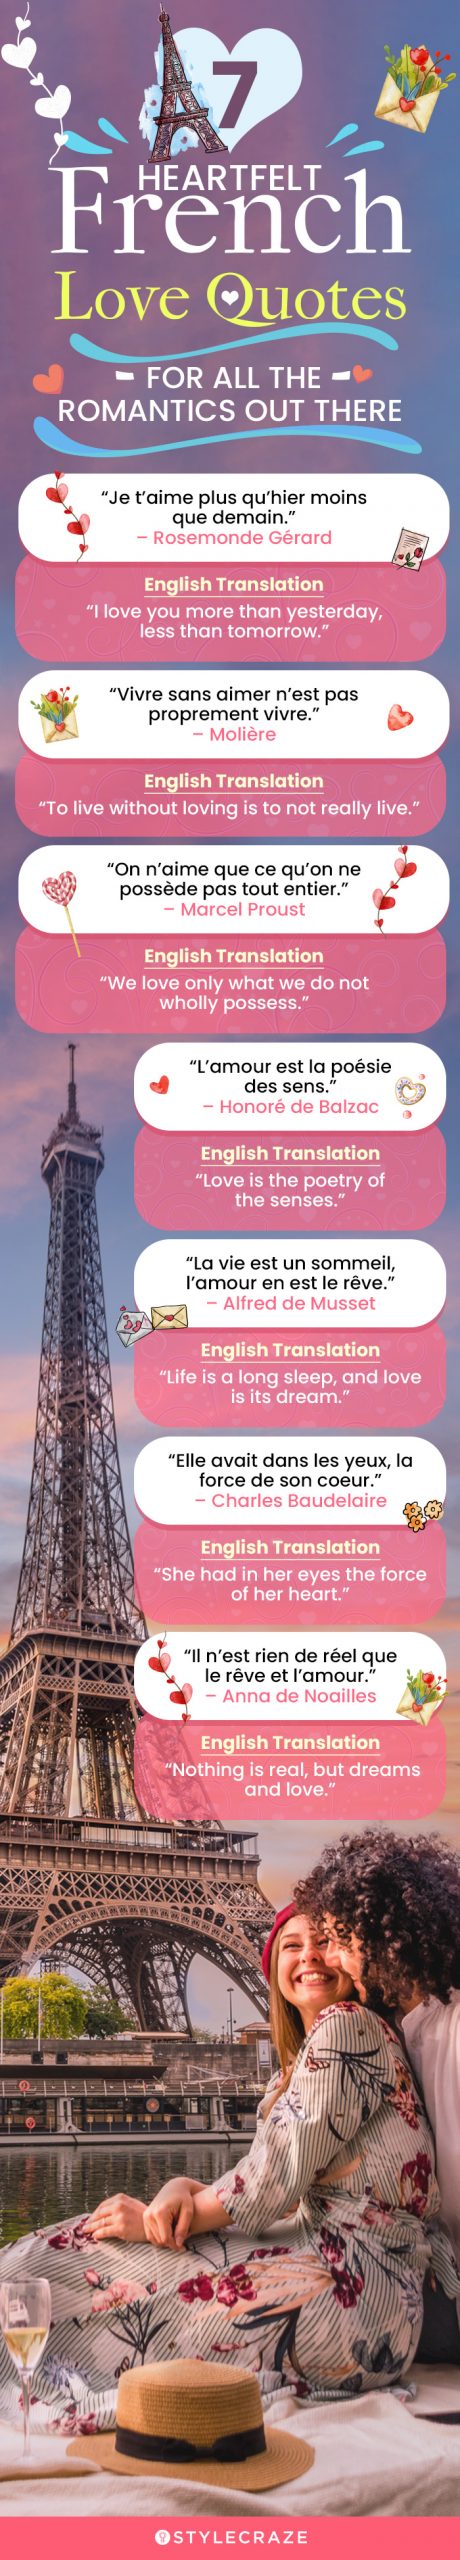 7 heartfelt french love quotes for all the romantics out there (infographic)